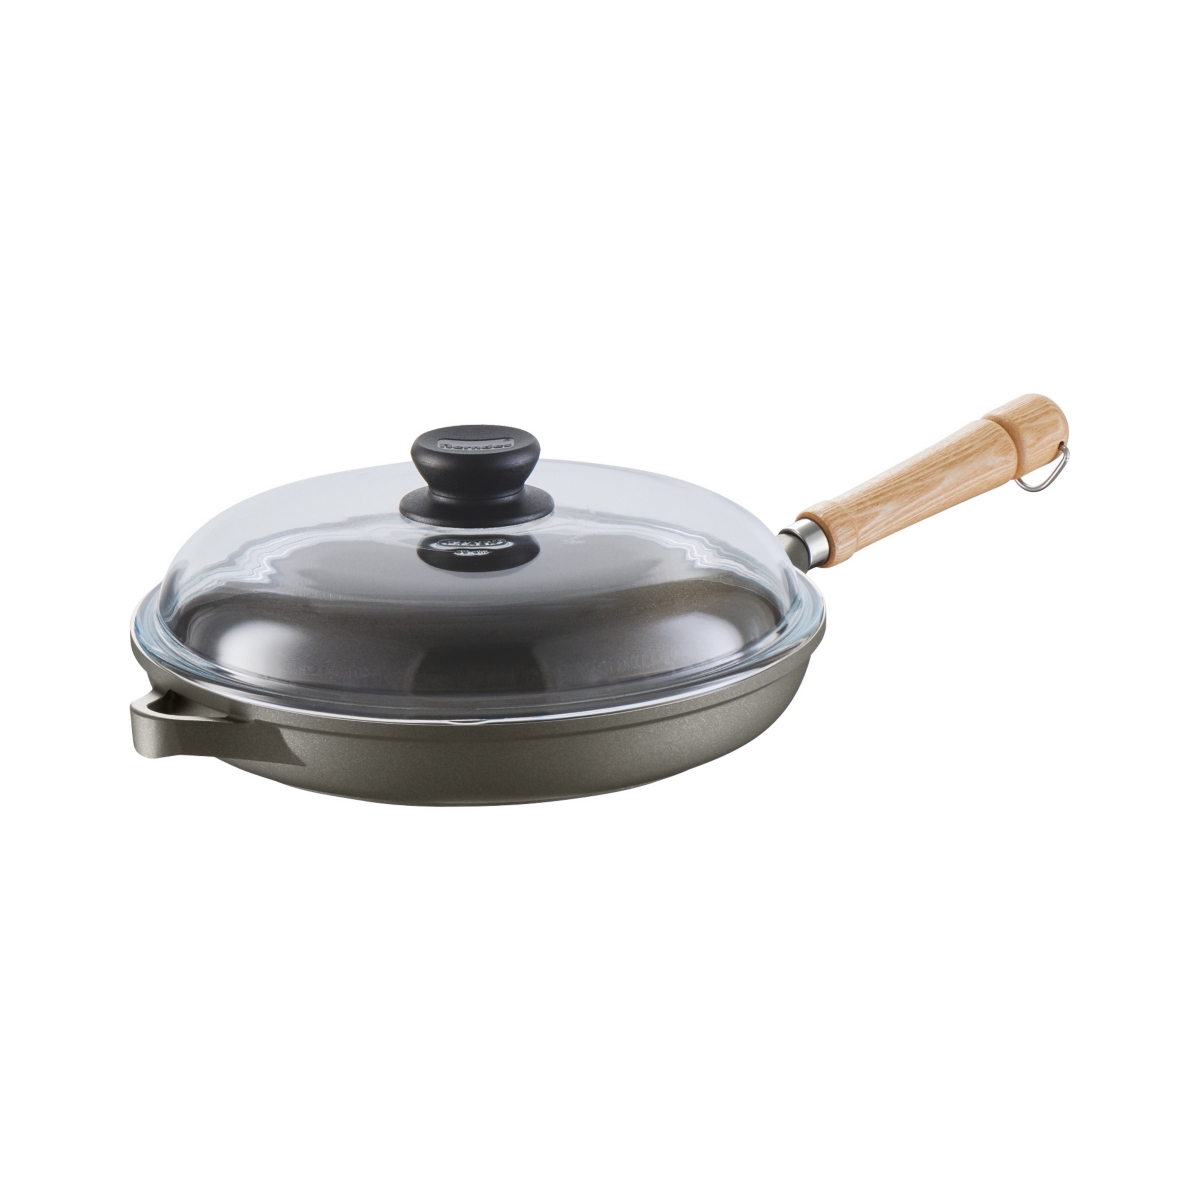 Berndes Tradition Induction 13 Fry Pan with lid